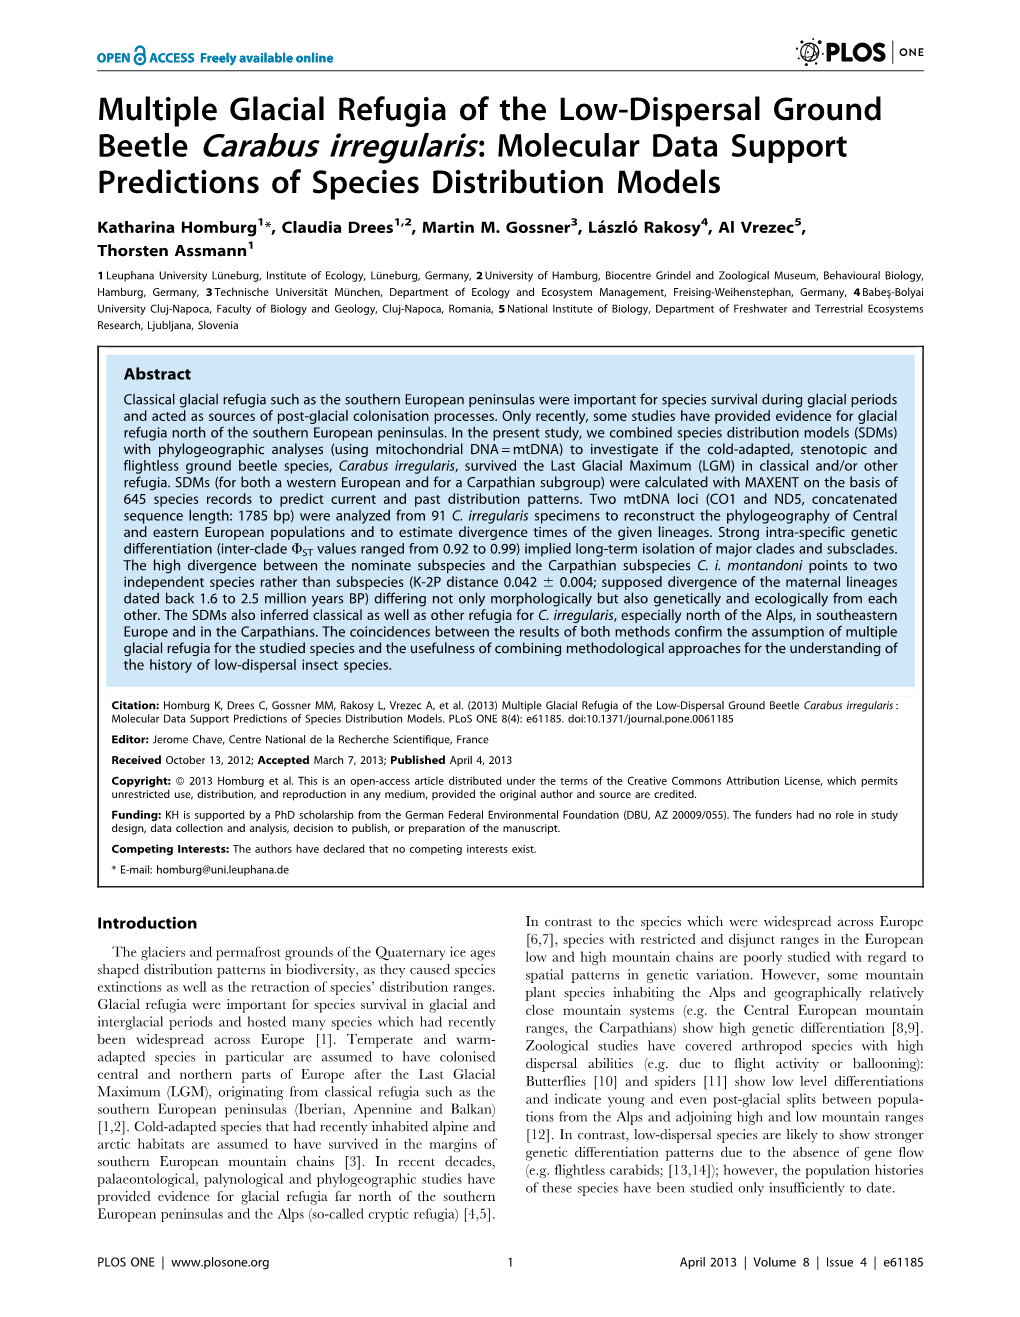 Multiple Glacial Refugia of the Low-Dispersal Ground Beetle Carabus Irregularis: Molecular Data Support Predictions of Species Distribution Models